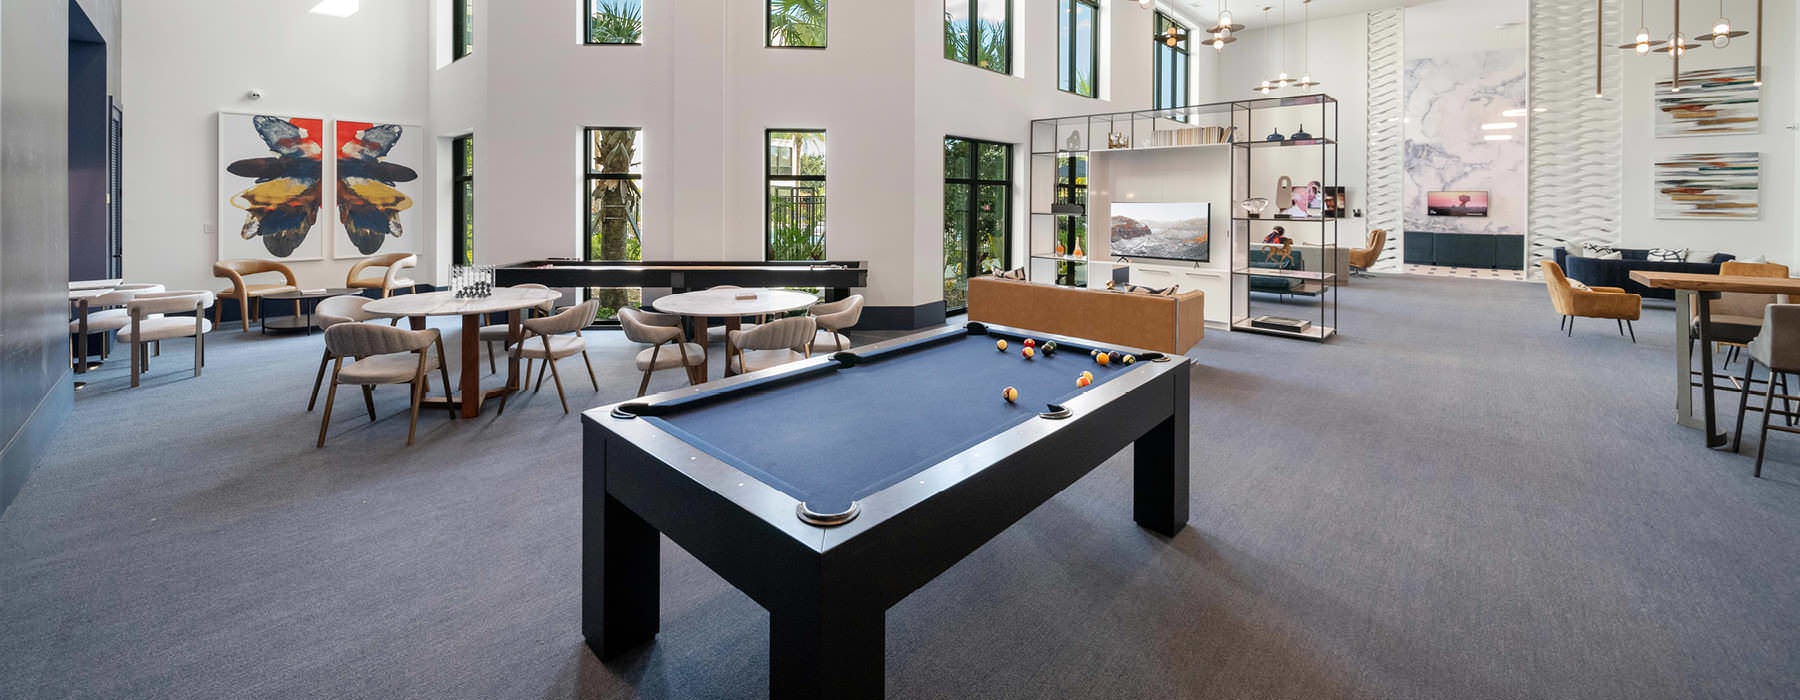 billiards table in spacious clubhouse